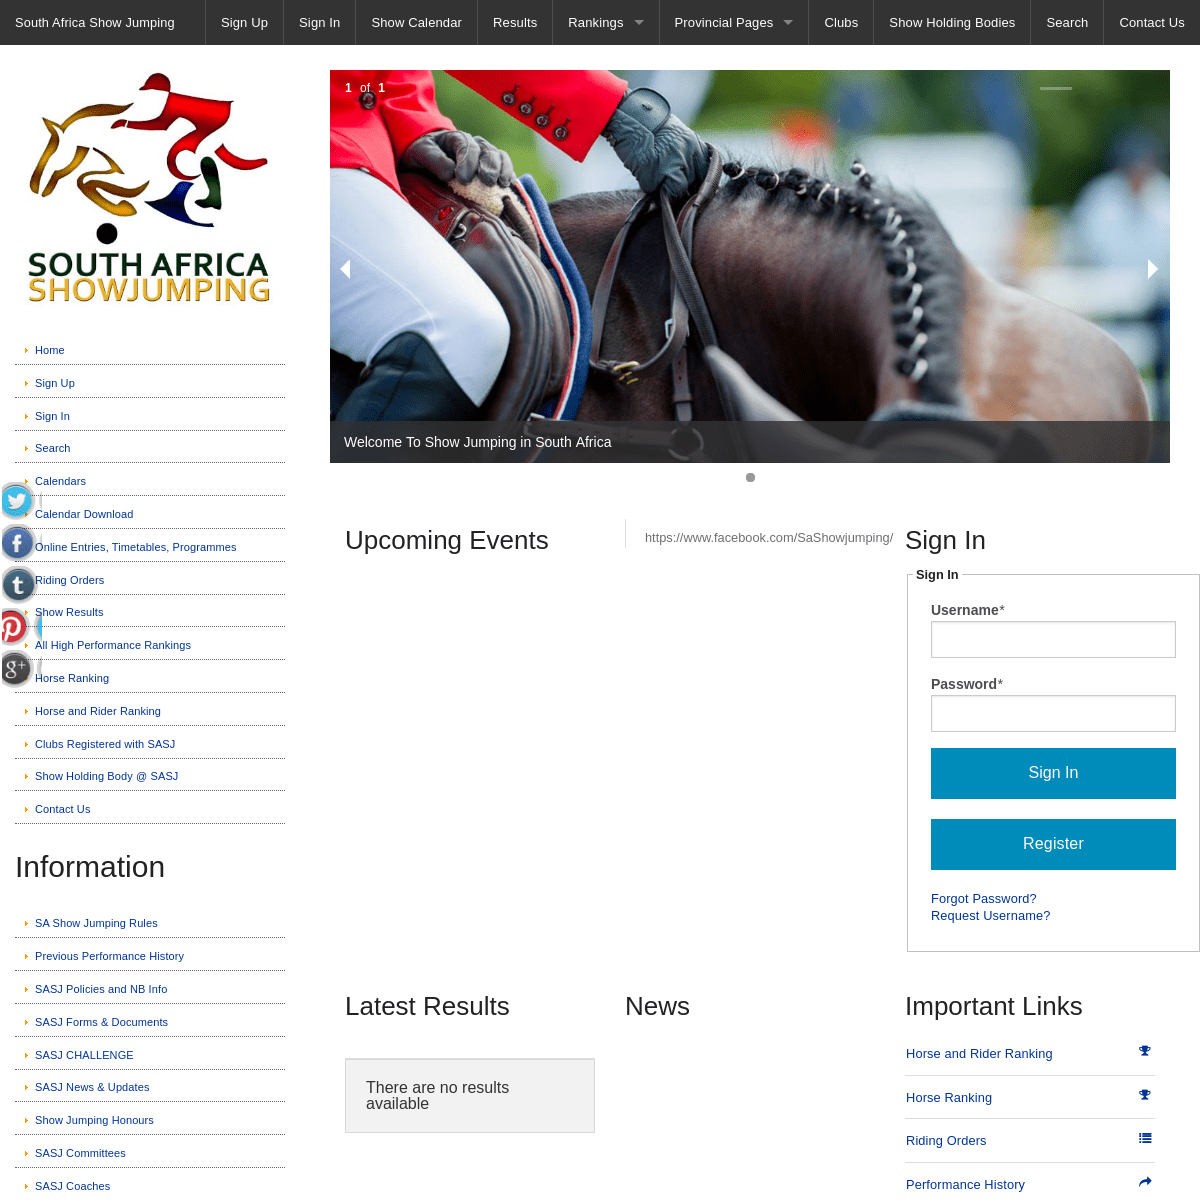 South African Show Jumping